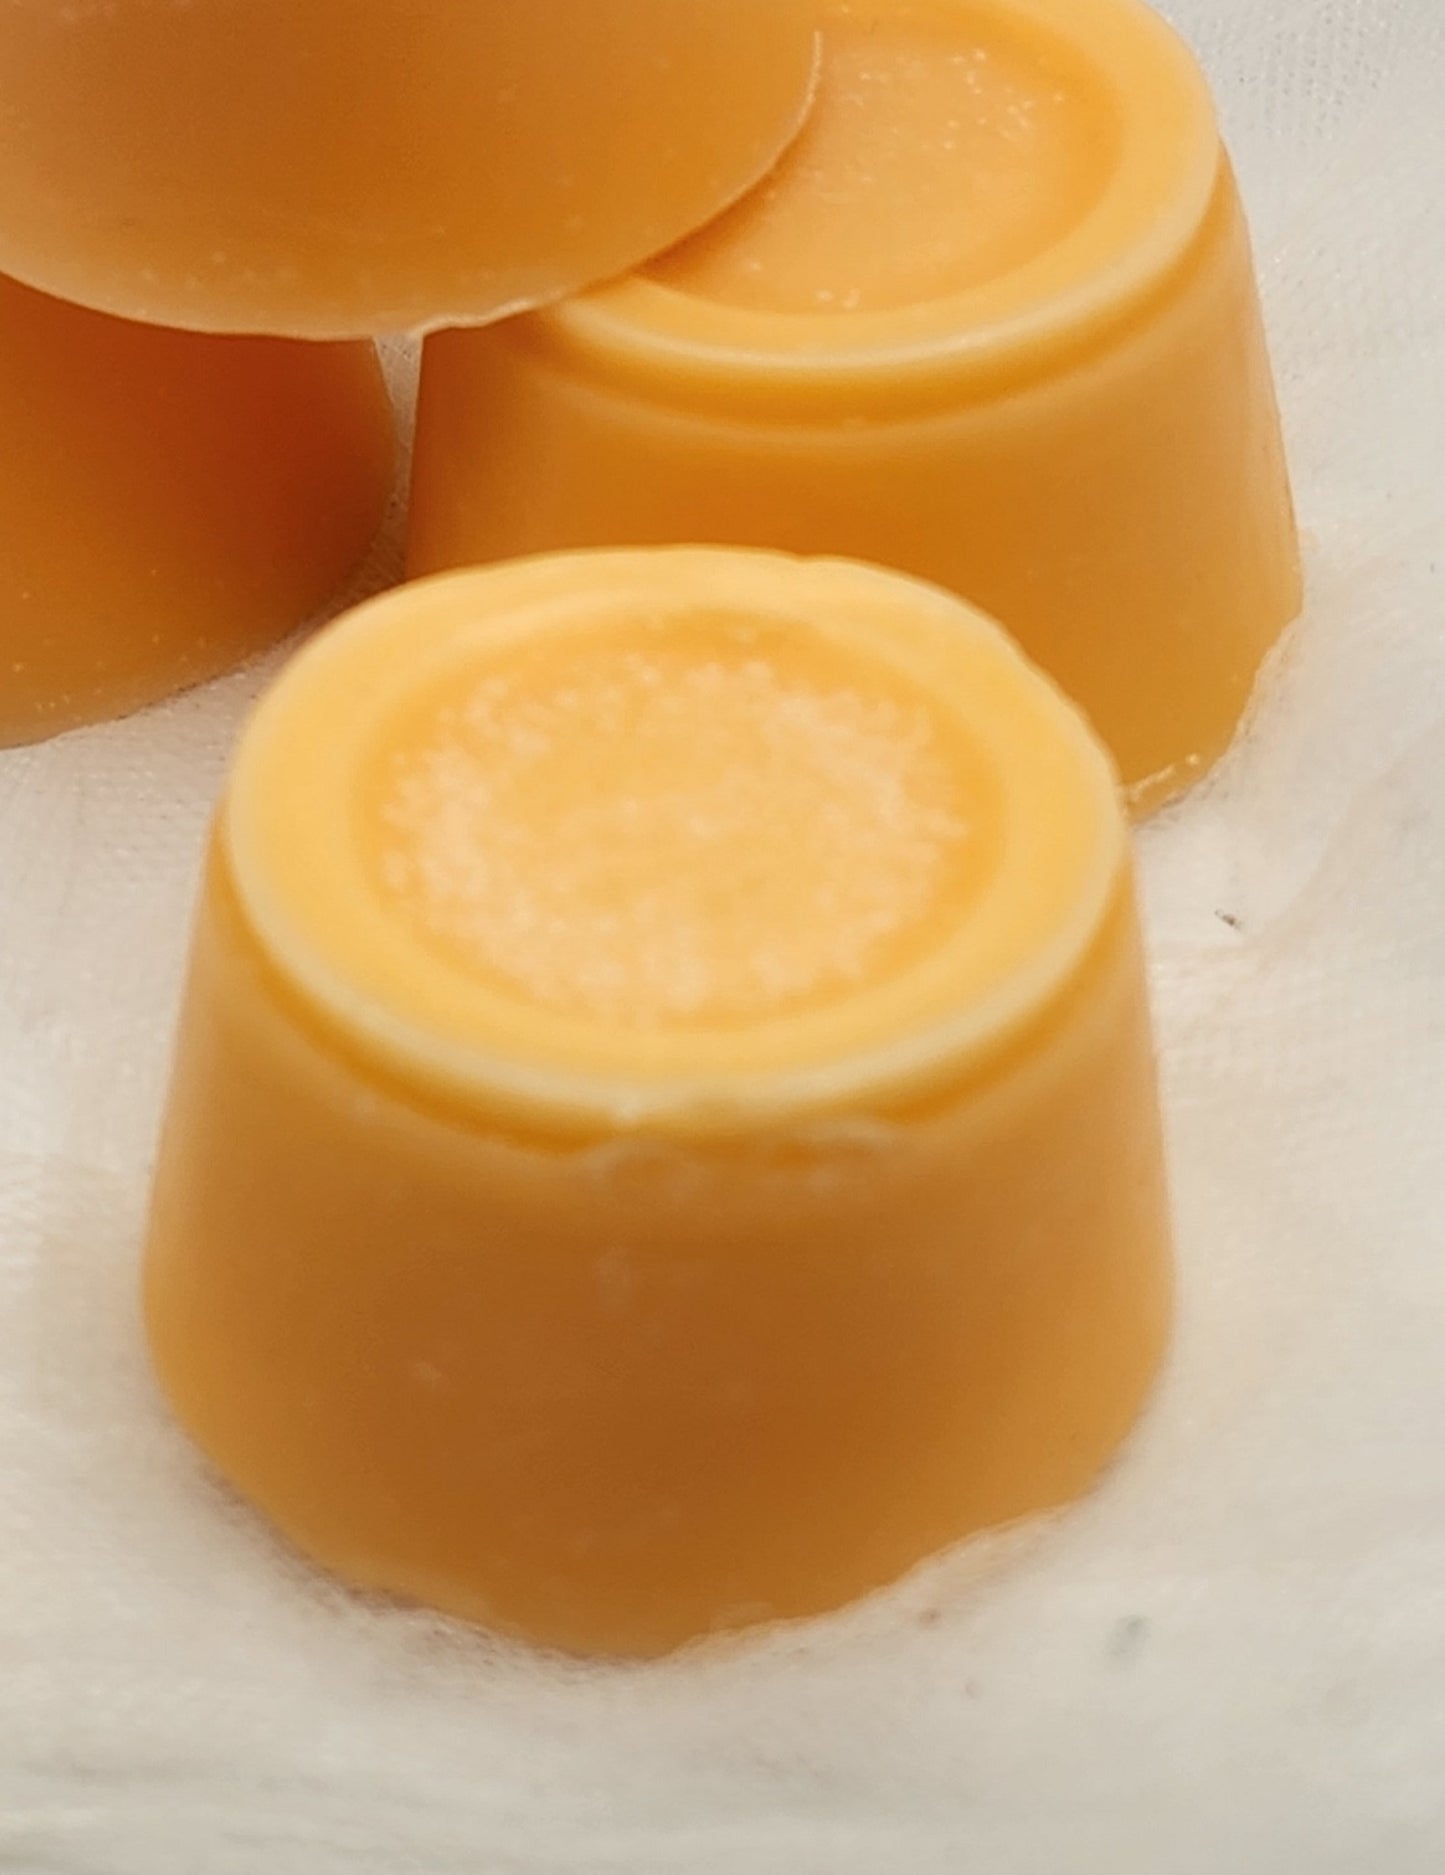 BLOOMING ORANGES CONDITIONER Bar / Less Plastic / Long Lasting / Less Waste / Gift Idea / Conditioner / No Plastic